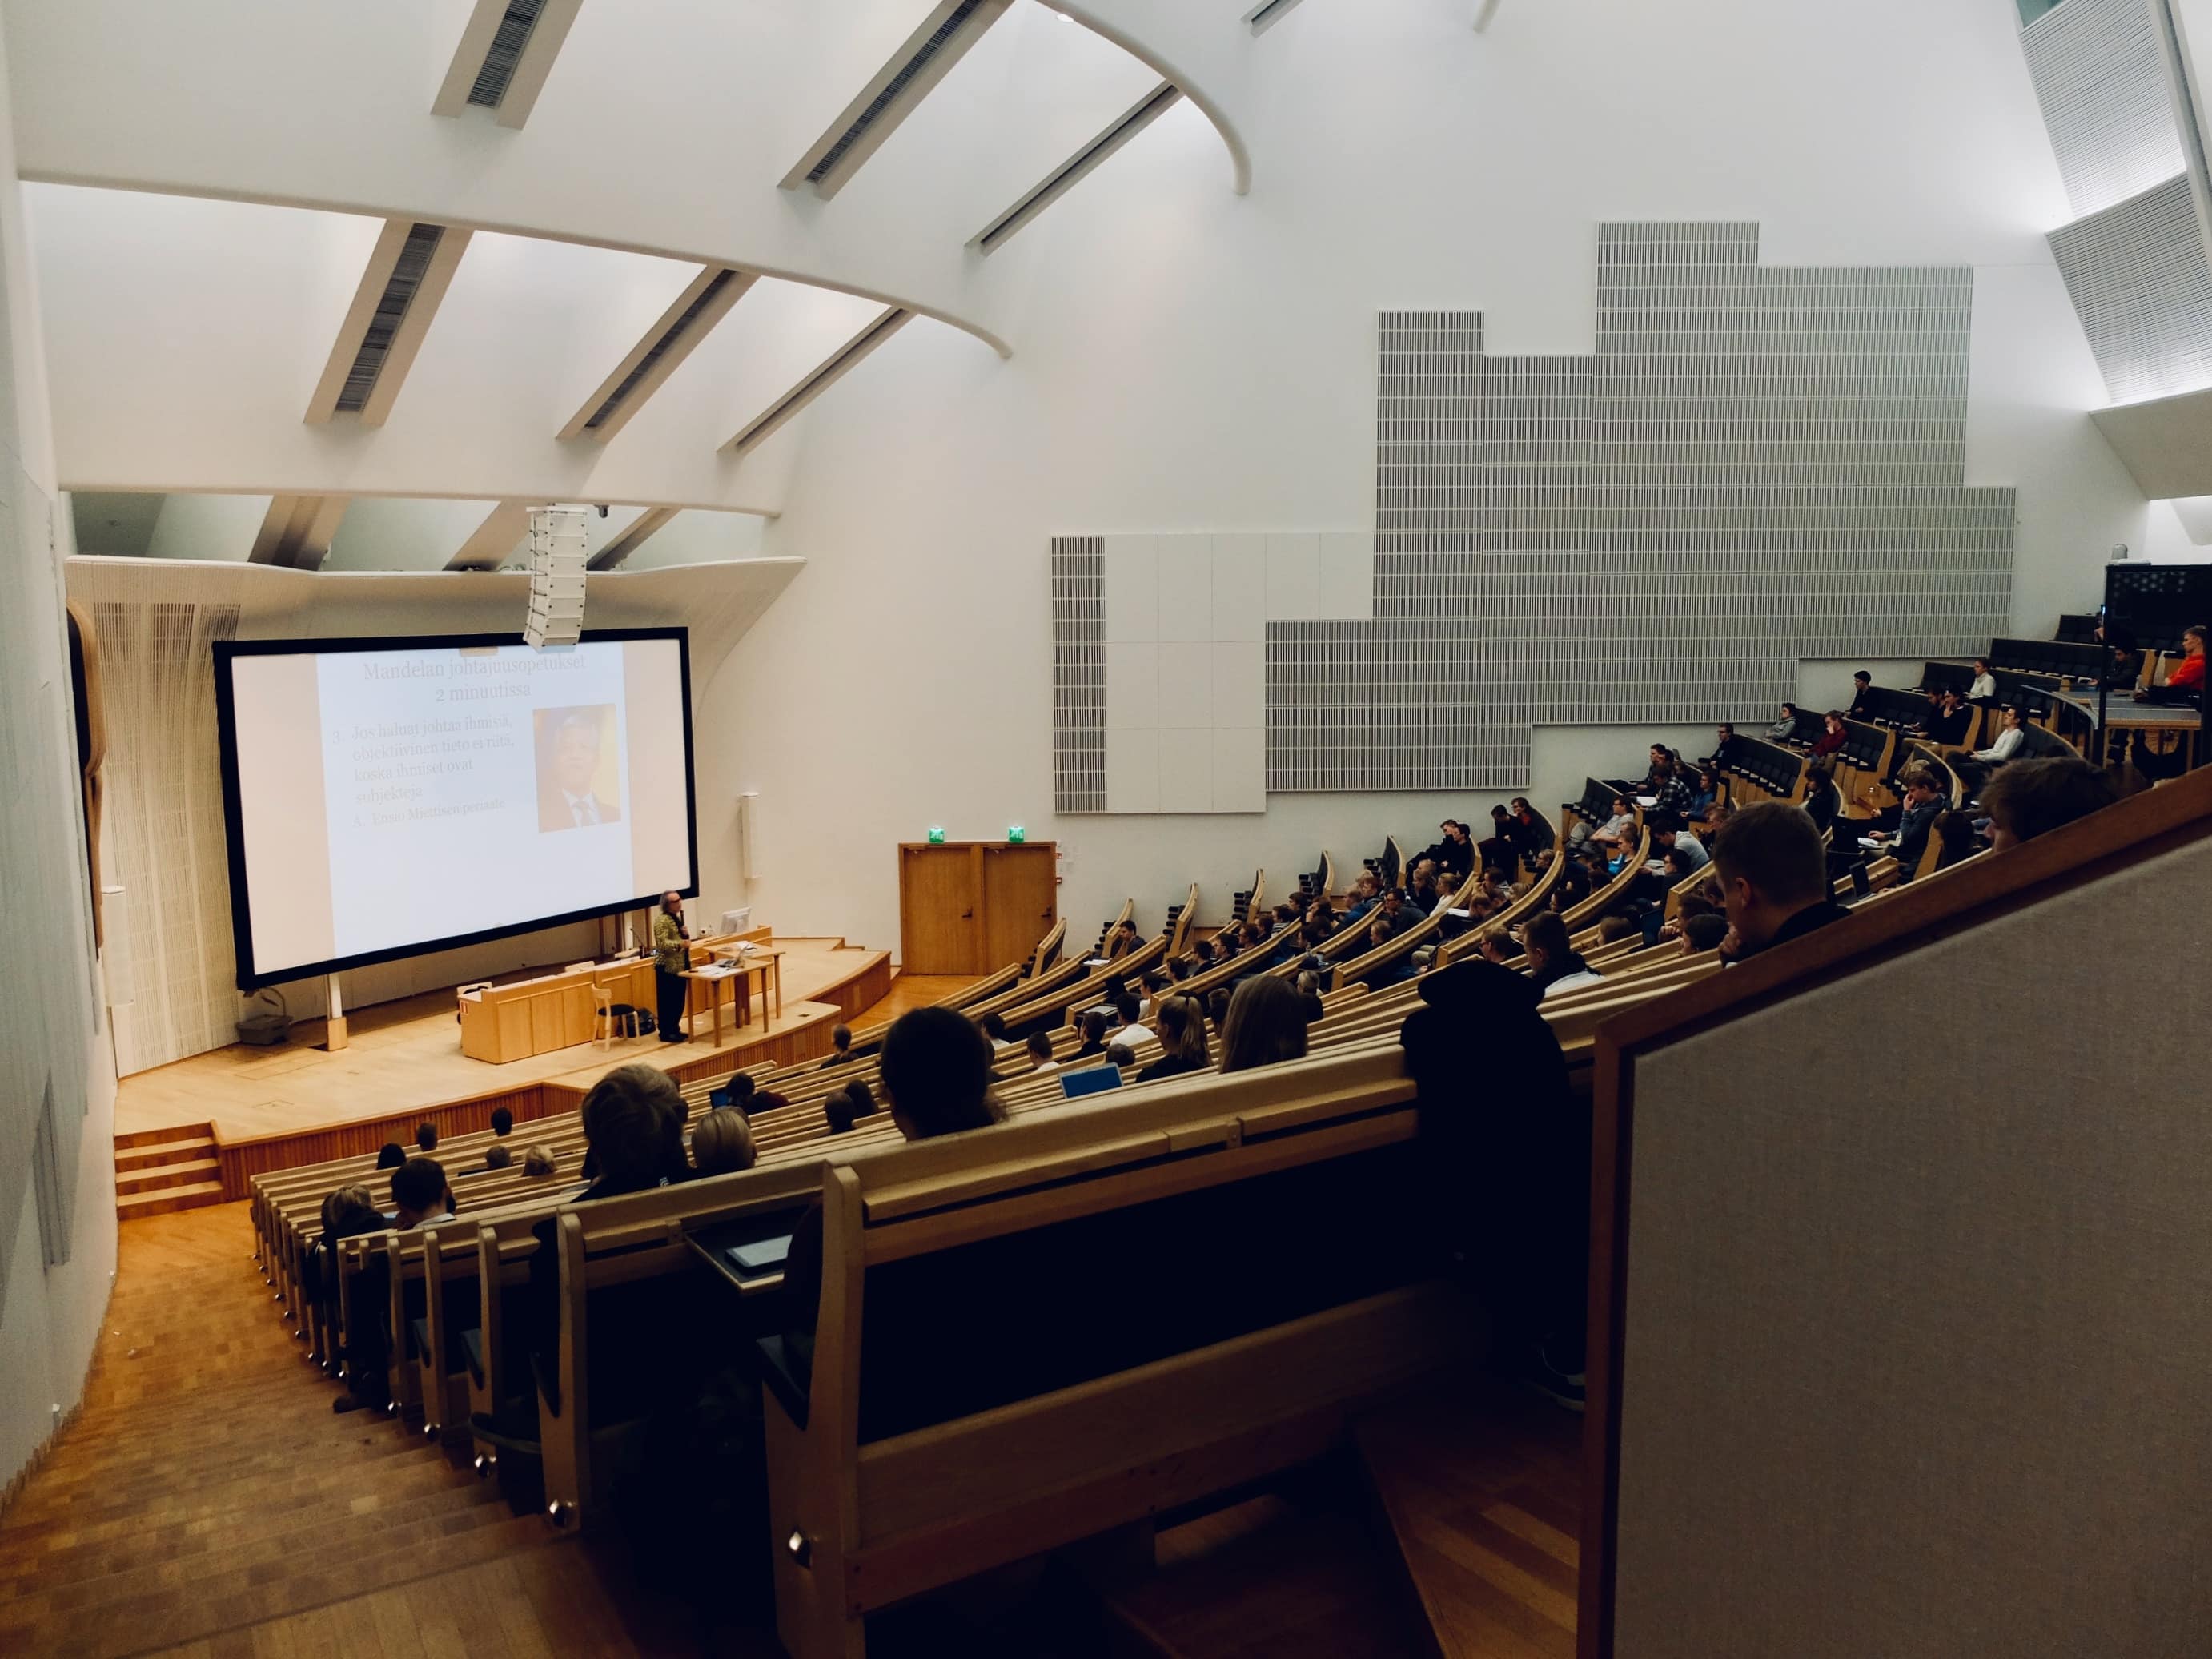 A university lecture hall